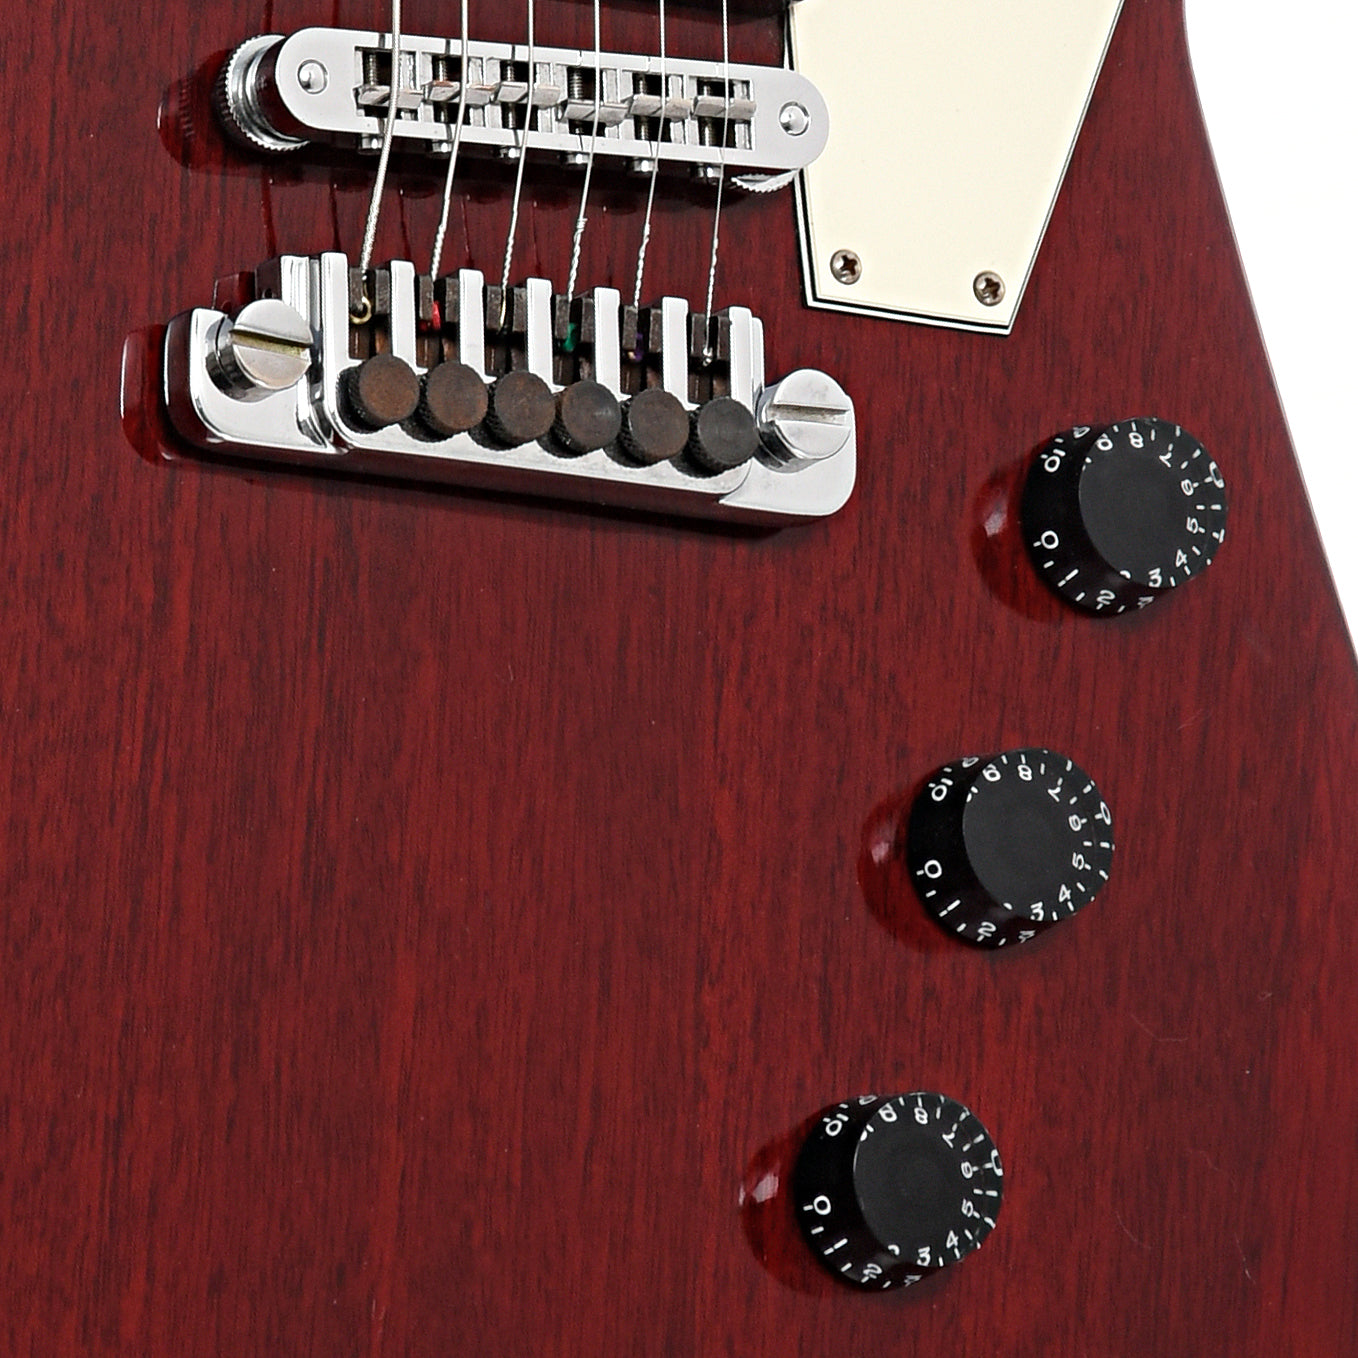 tailpiece, bridge and controls of Gibson Explorer